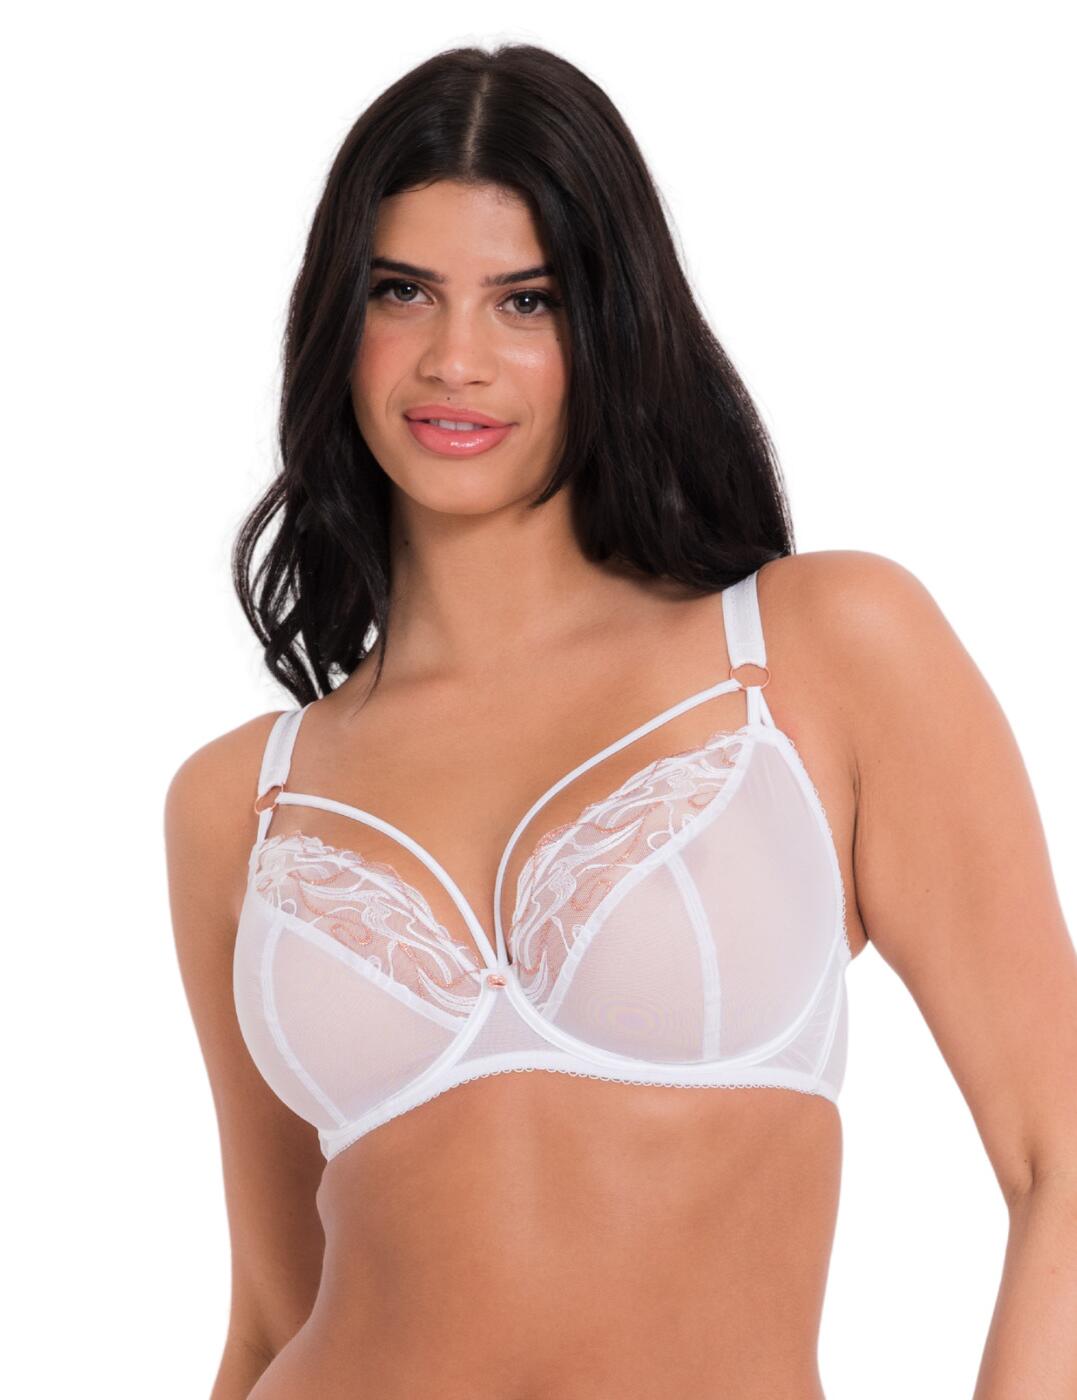 Various Cuup bras US size 32H (UK 32FF), $25 each, US only, PayPal